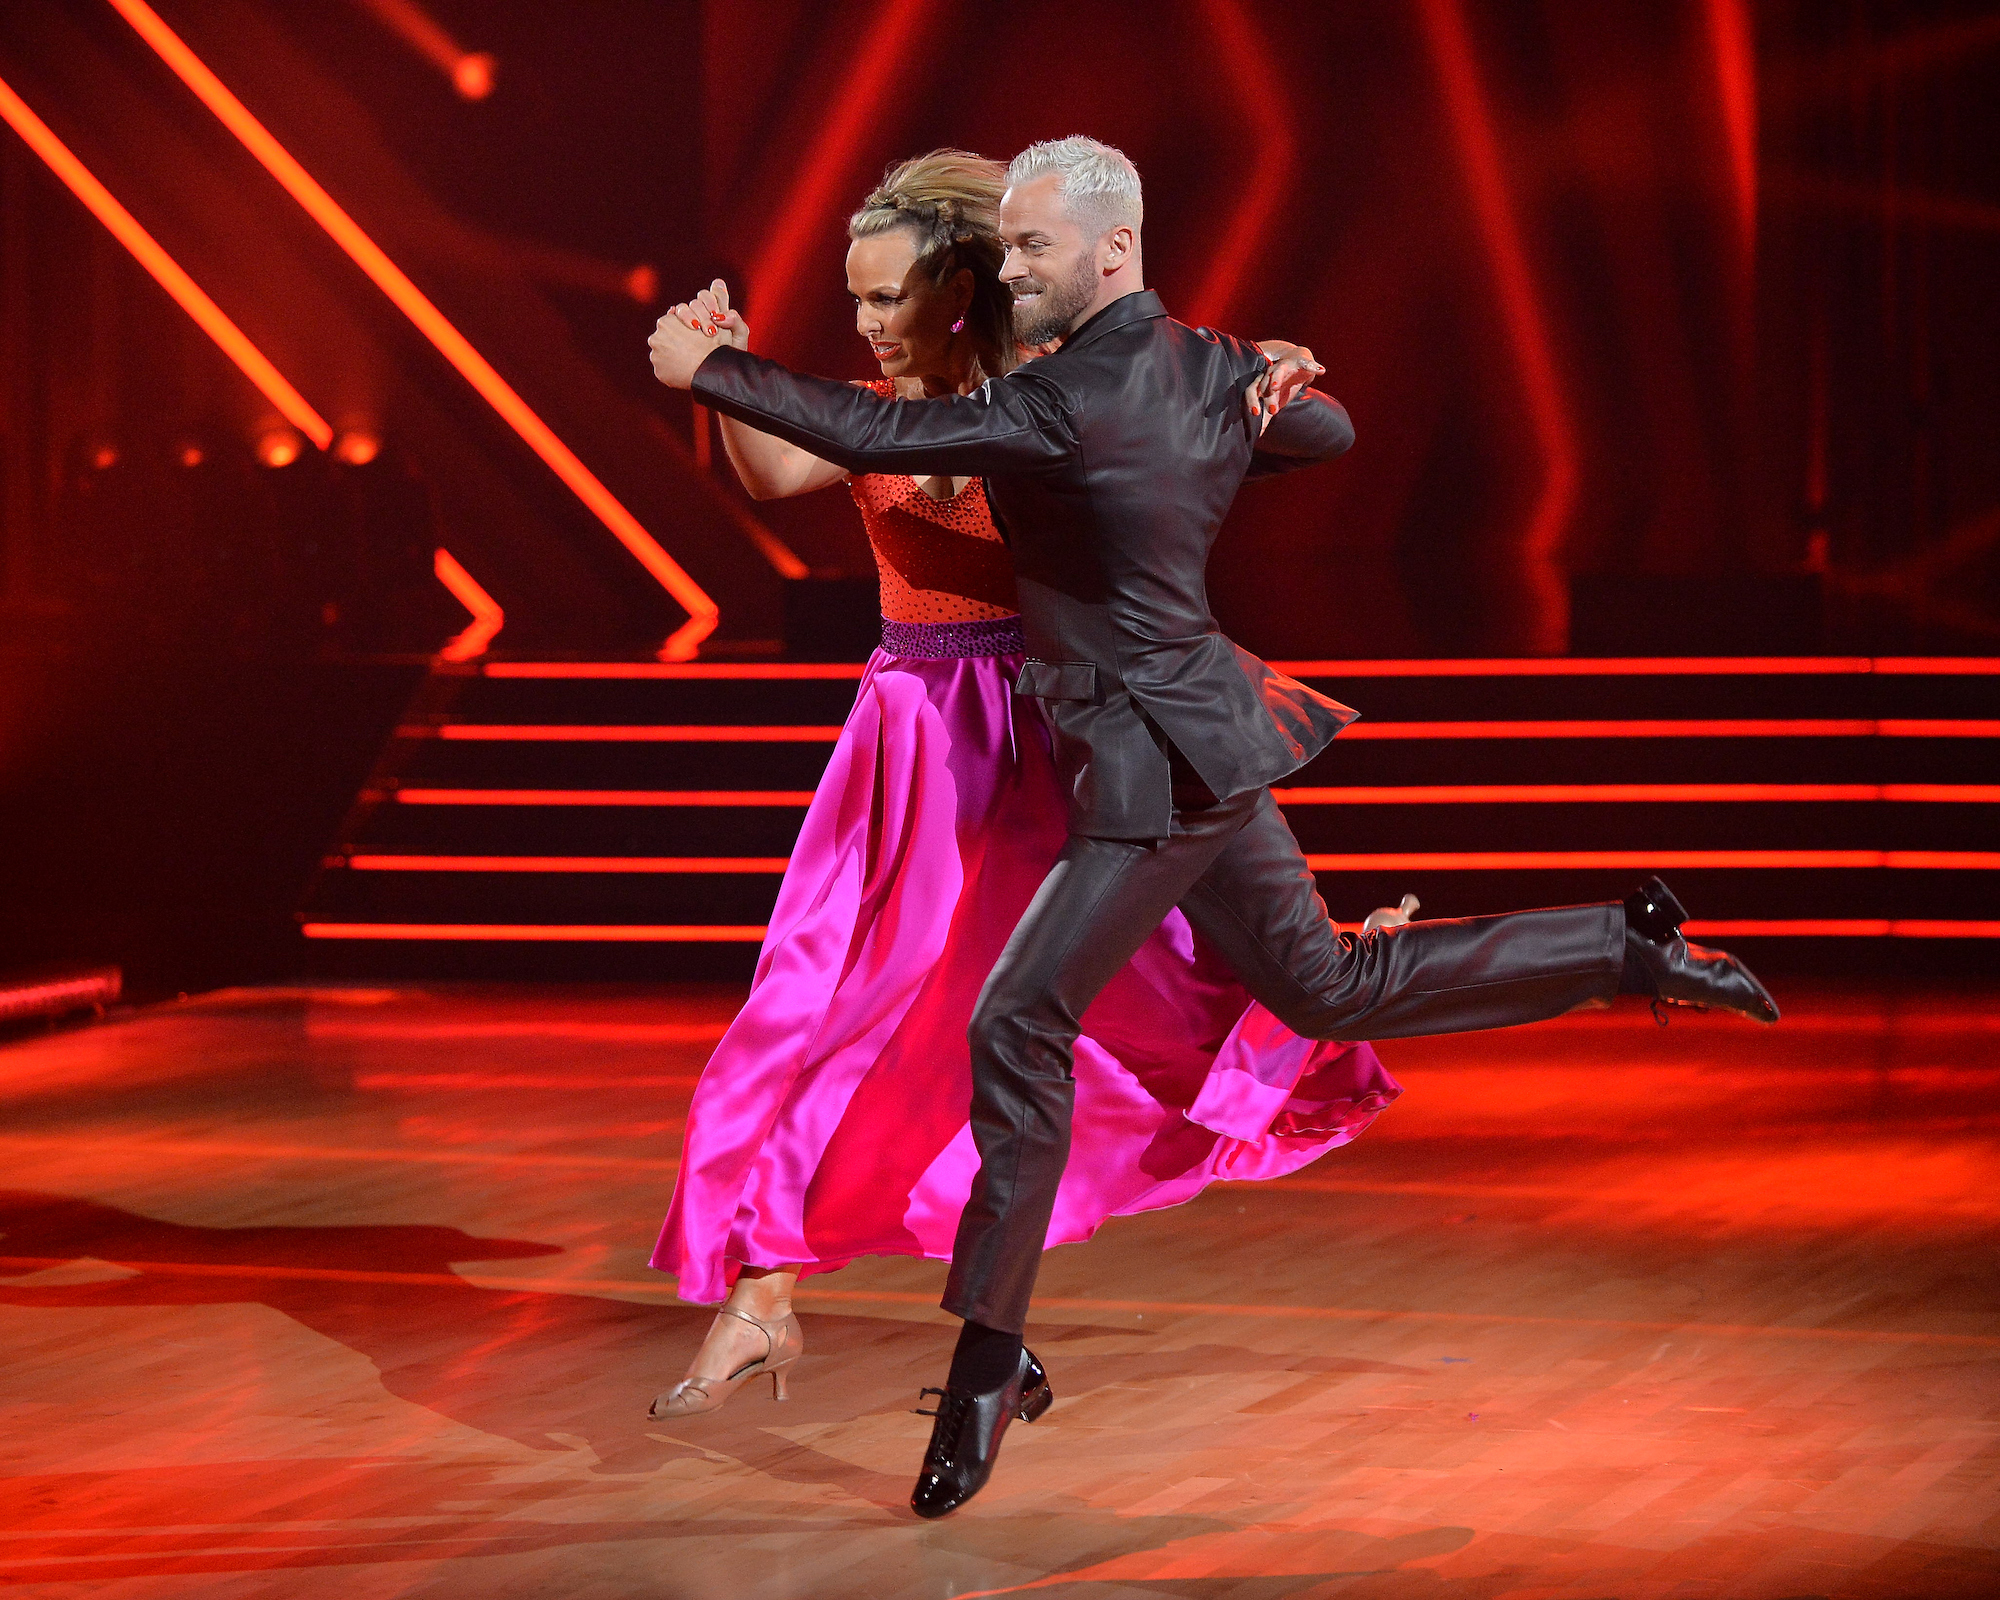 Dancing with the Stars: Melora Hardin dances with Artem Chigvintsev